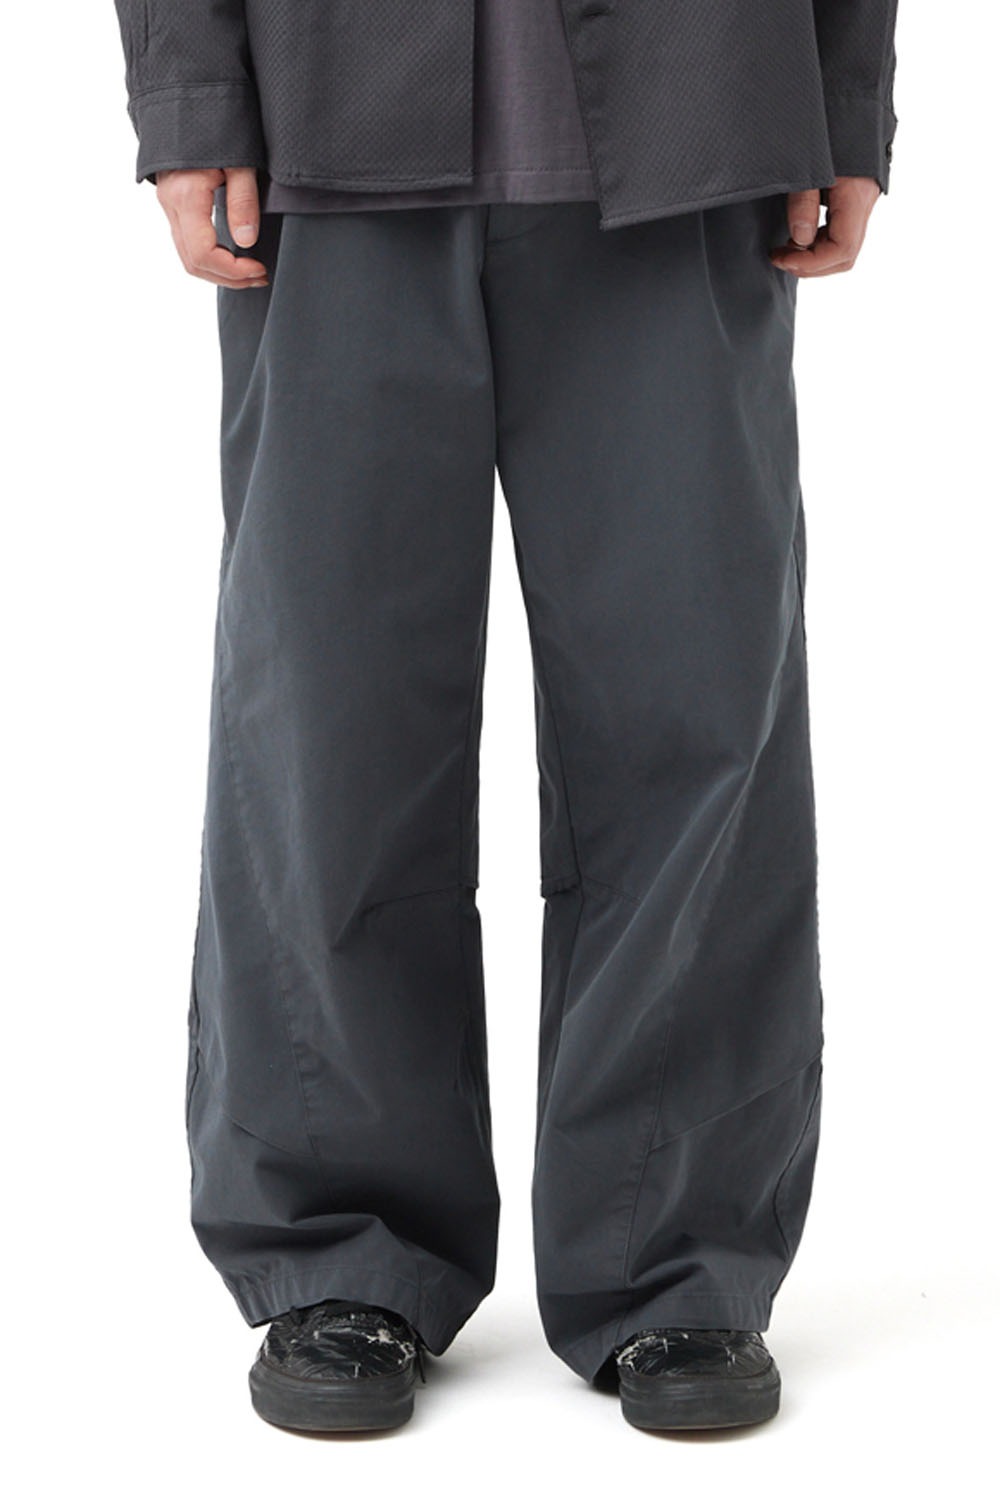 Triangle Trousers V2-Washed Blue Charcoal